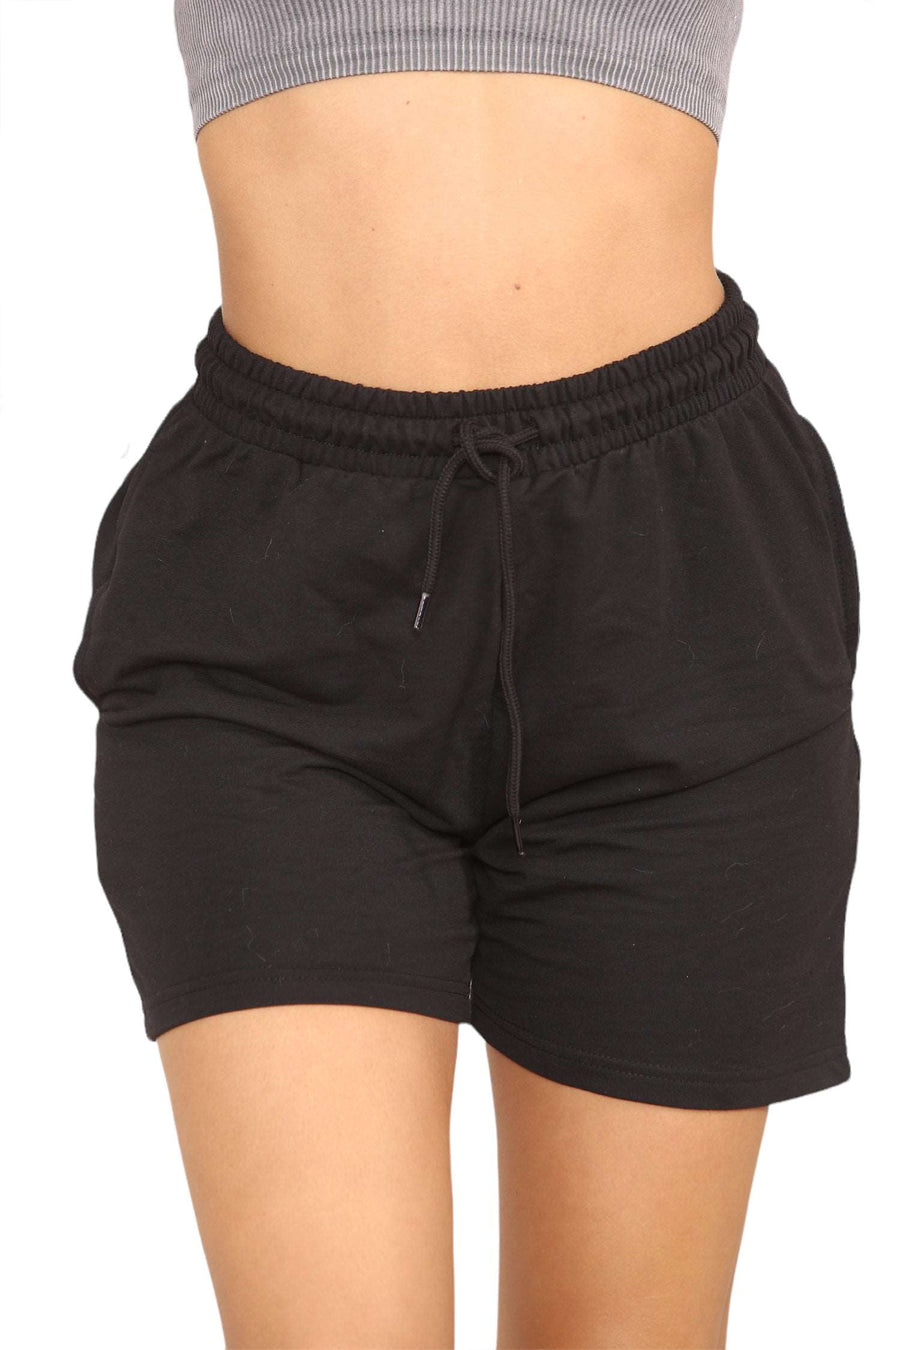 Comfy Mid-Length Black Cycling Shorts for Women!